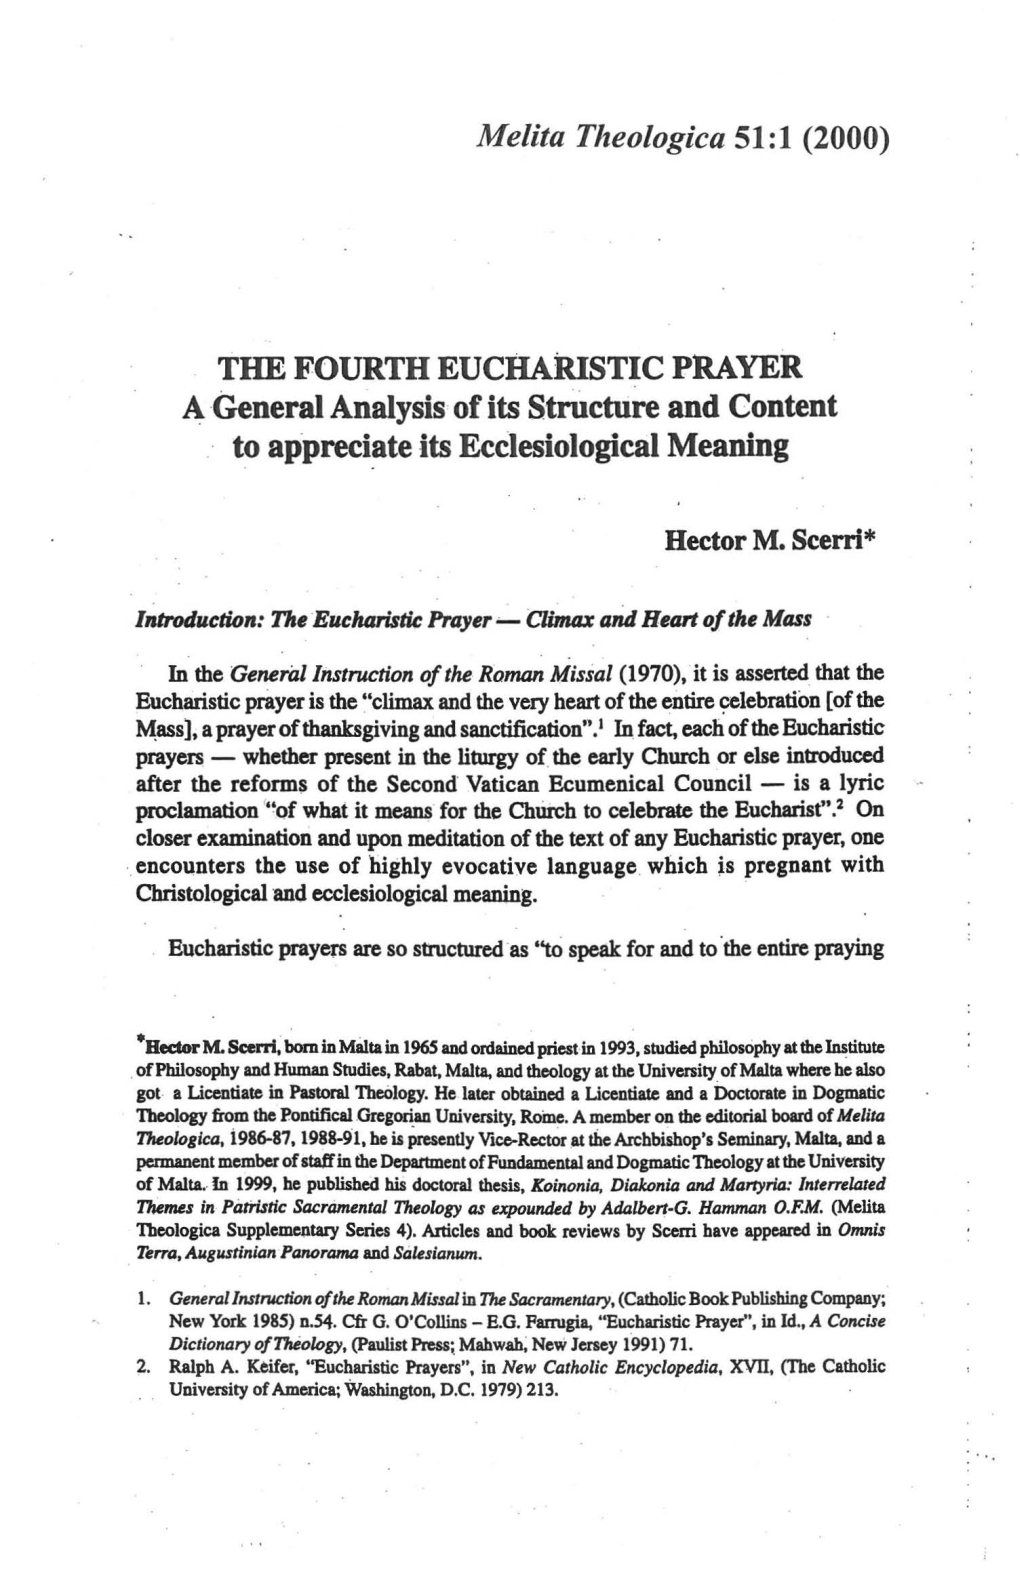 (2000) the FOURTH EUCHARISTIC PRAYER a General Analysis of Its